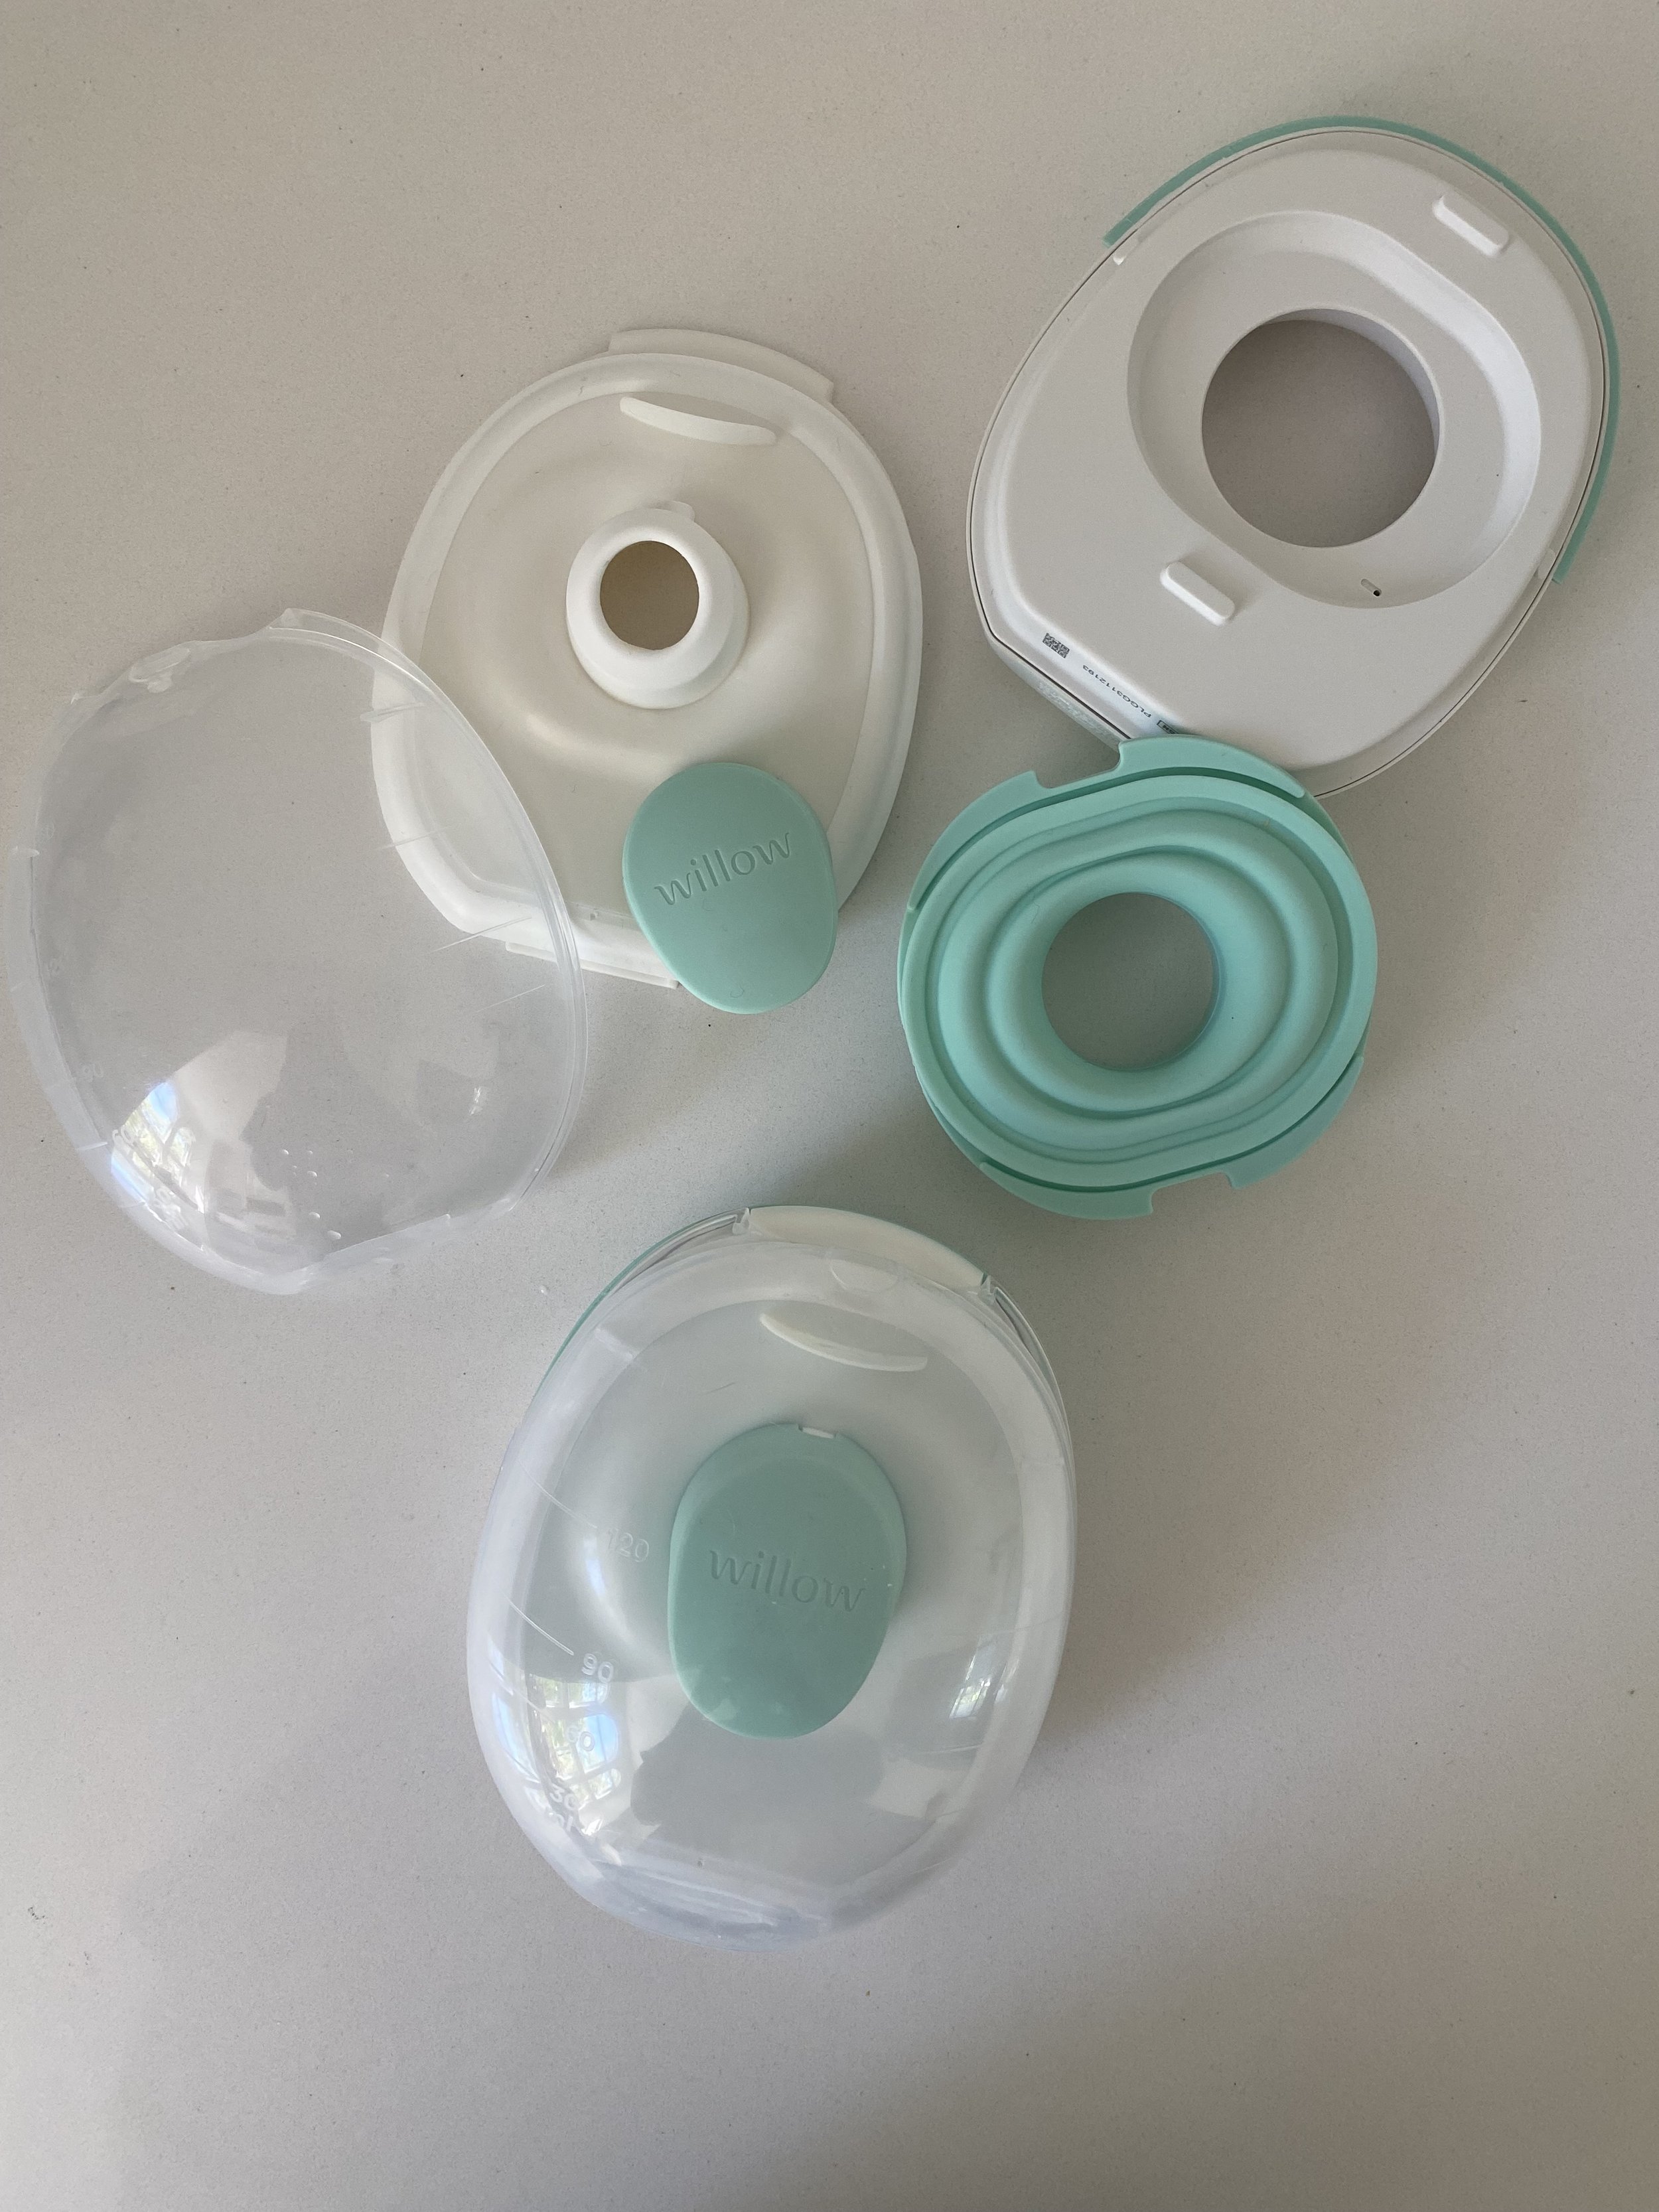 WILLOW ALL-IN-ONE IN-BRA BREAST PUMP 2 FLANGES SIZE 21MM USE W